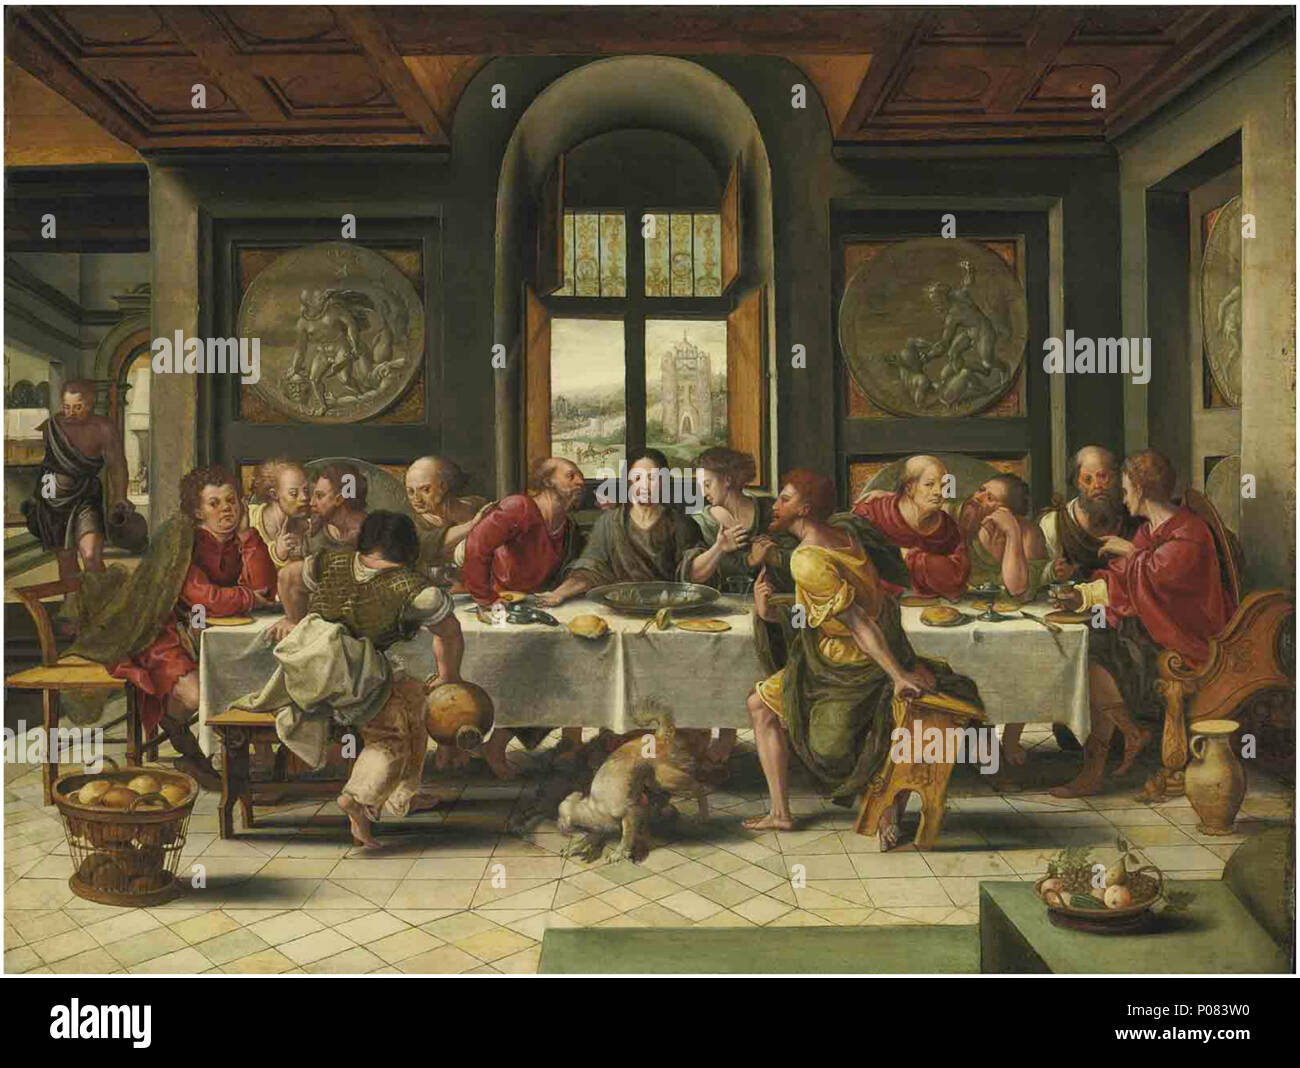 English: The Most Notable Differences Between The Different Versions Is The  Checkerboard Pattern Of The Floor And That There Is Only One Dog . The Last  Supper . 1545 270 Pieter